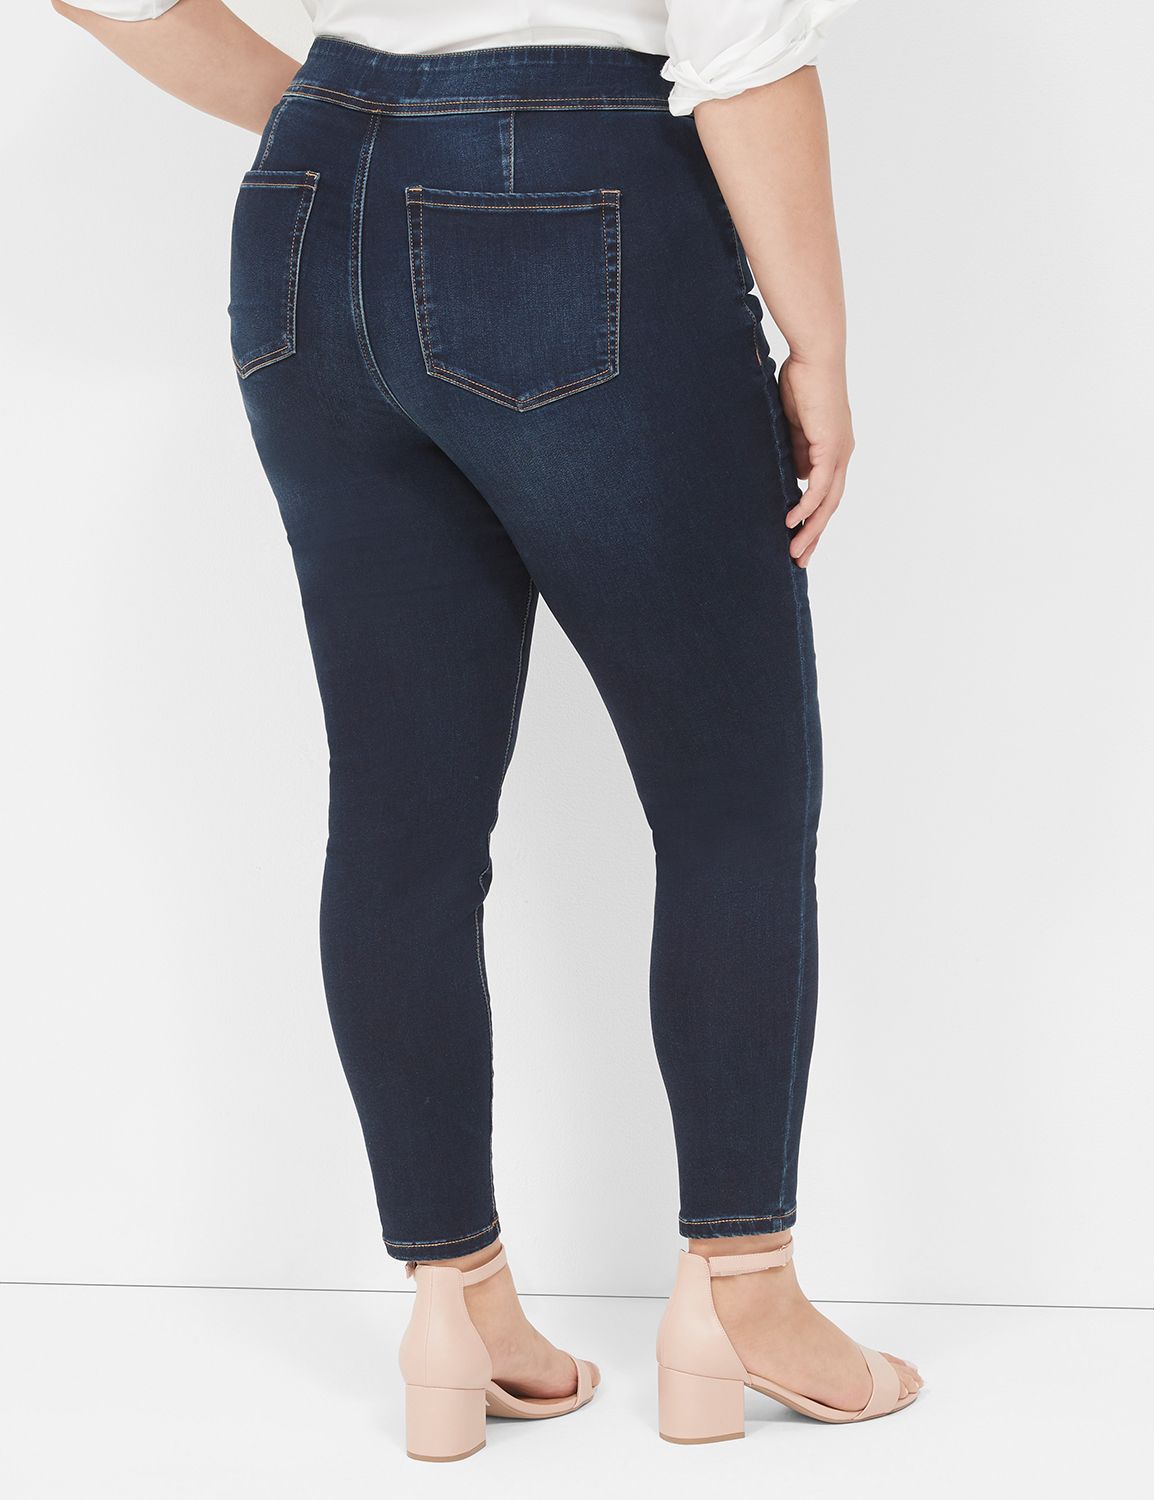 High-Waisted Plus-Size Rockstar Jeggings